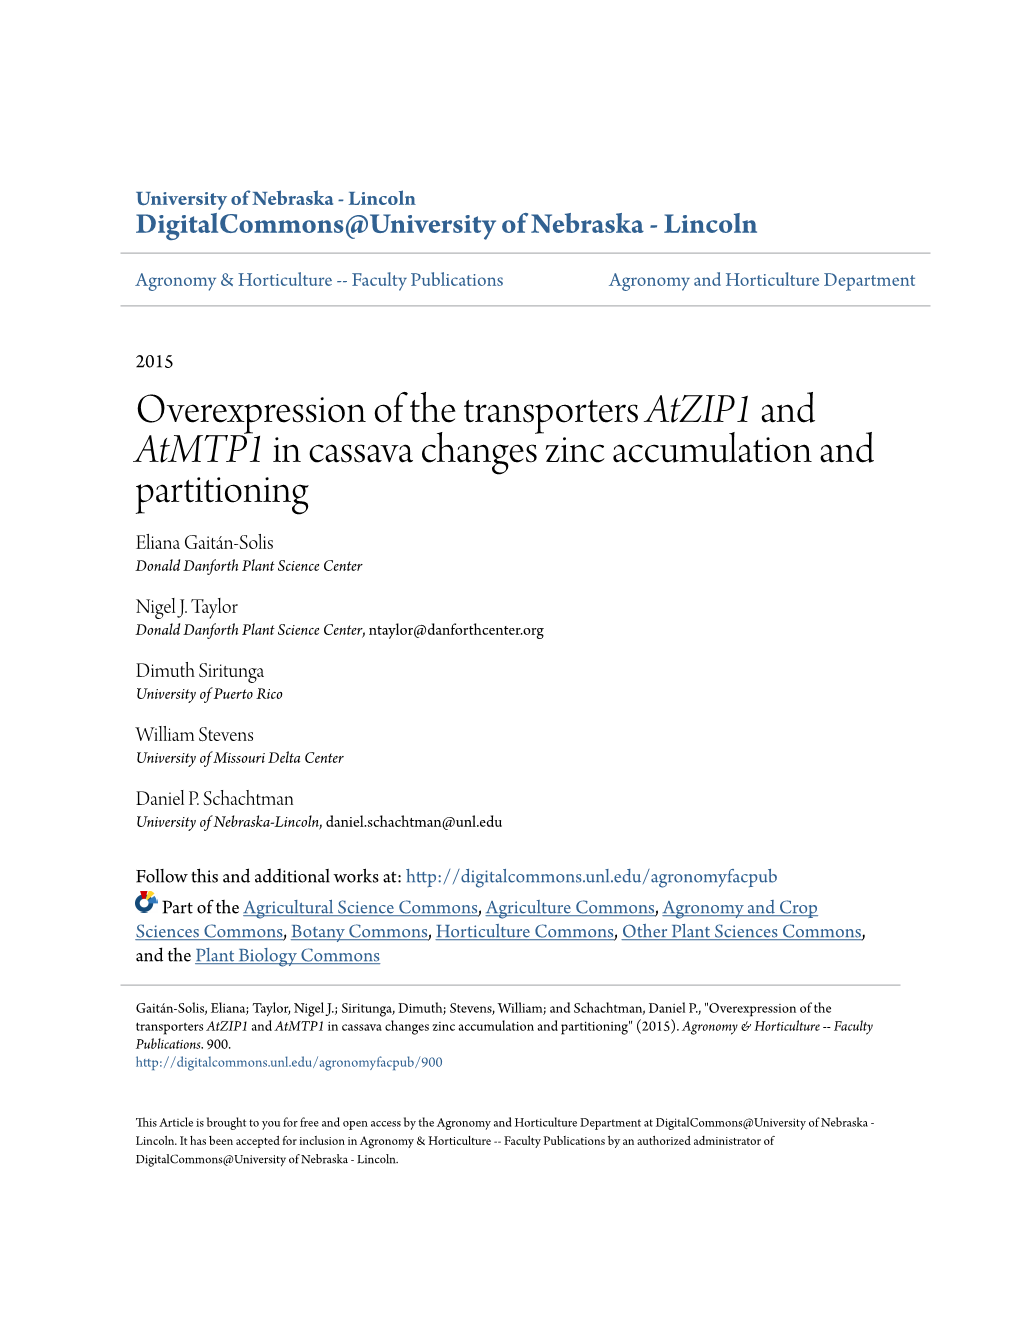 Overexpression of the Transporters Atzip1 and Atmtp1 in Cassava Changes Zinc Accumulation and Partitioning Eliana Gaitán-Solis Donald Danforth Plant Science Center